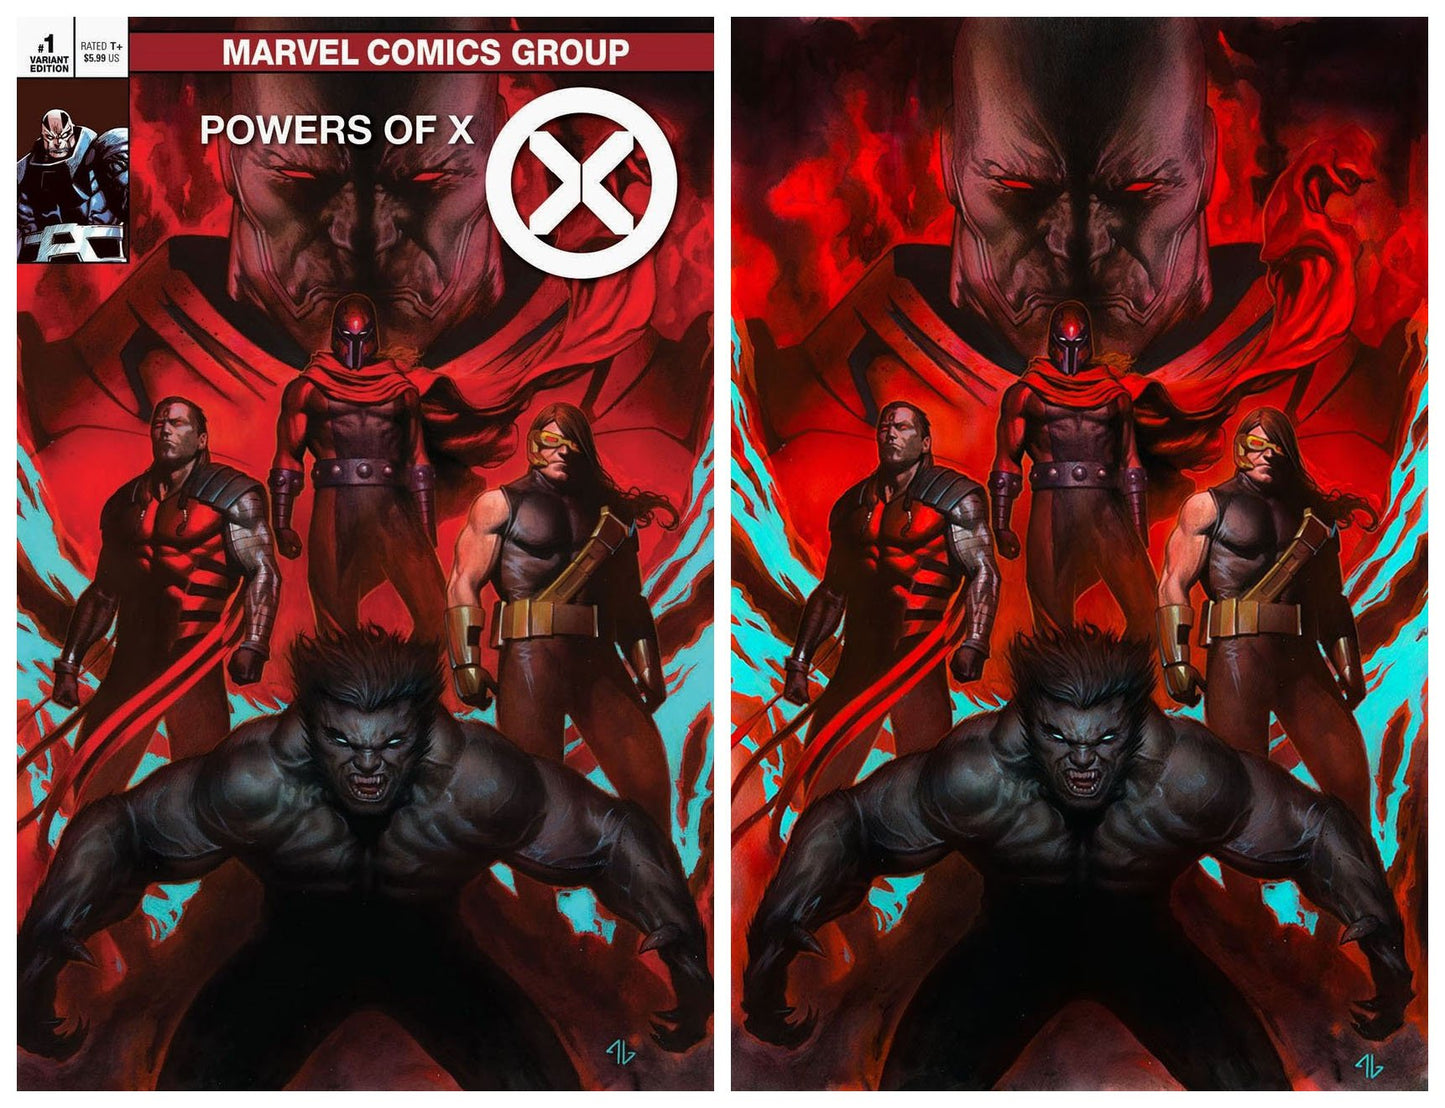 POWERS OF X #1 ADI GRANOV TRADE DRESS/VIRGIN VARIANT SET LIMITED TO 400 SETS WITH NUMBERED COA